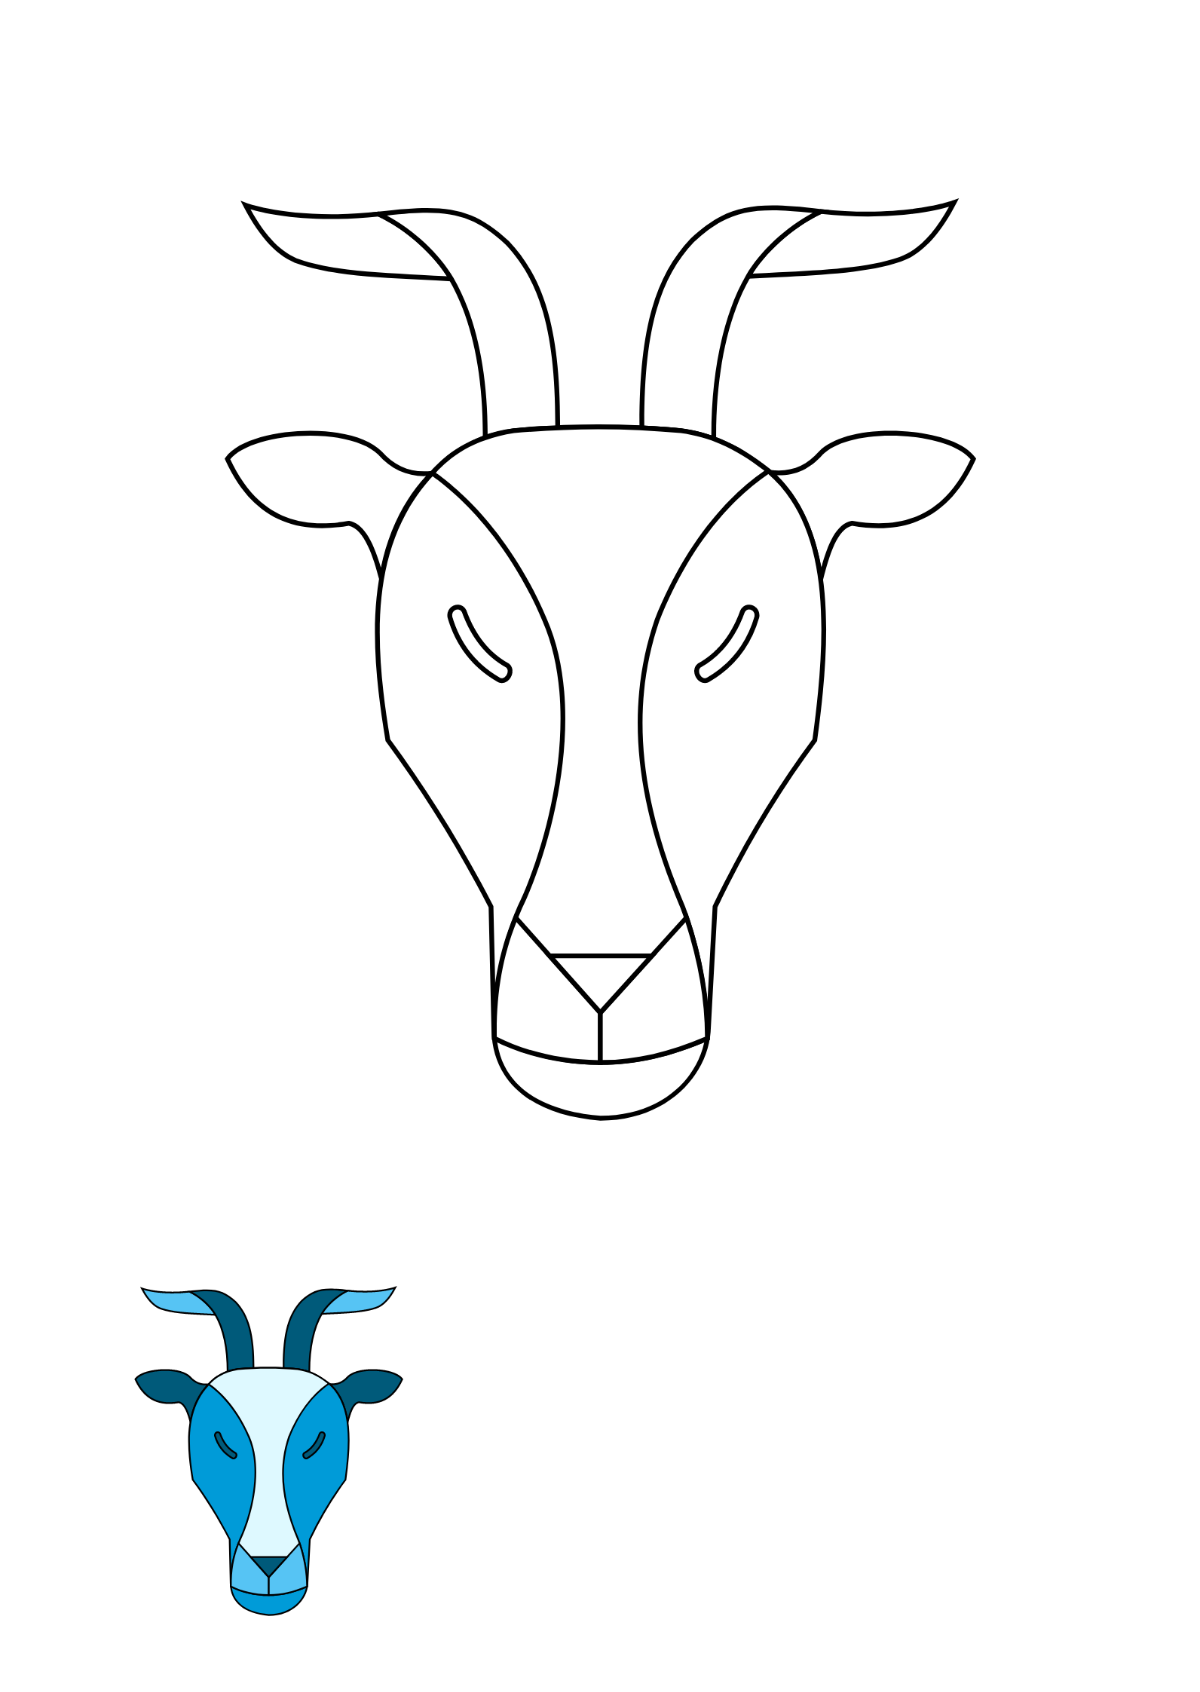 Capricorn Sign coloring page